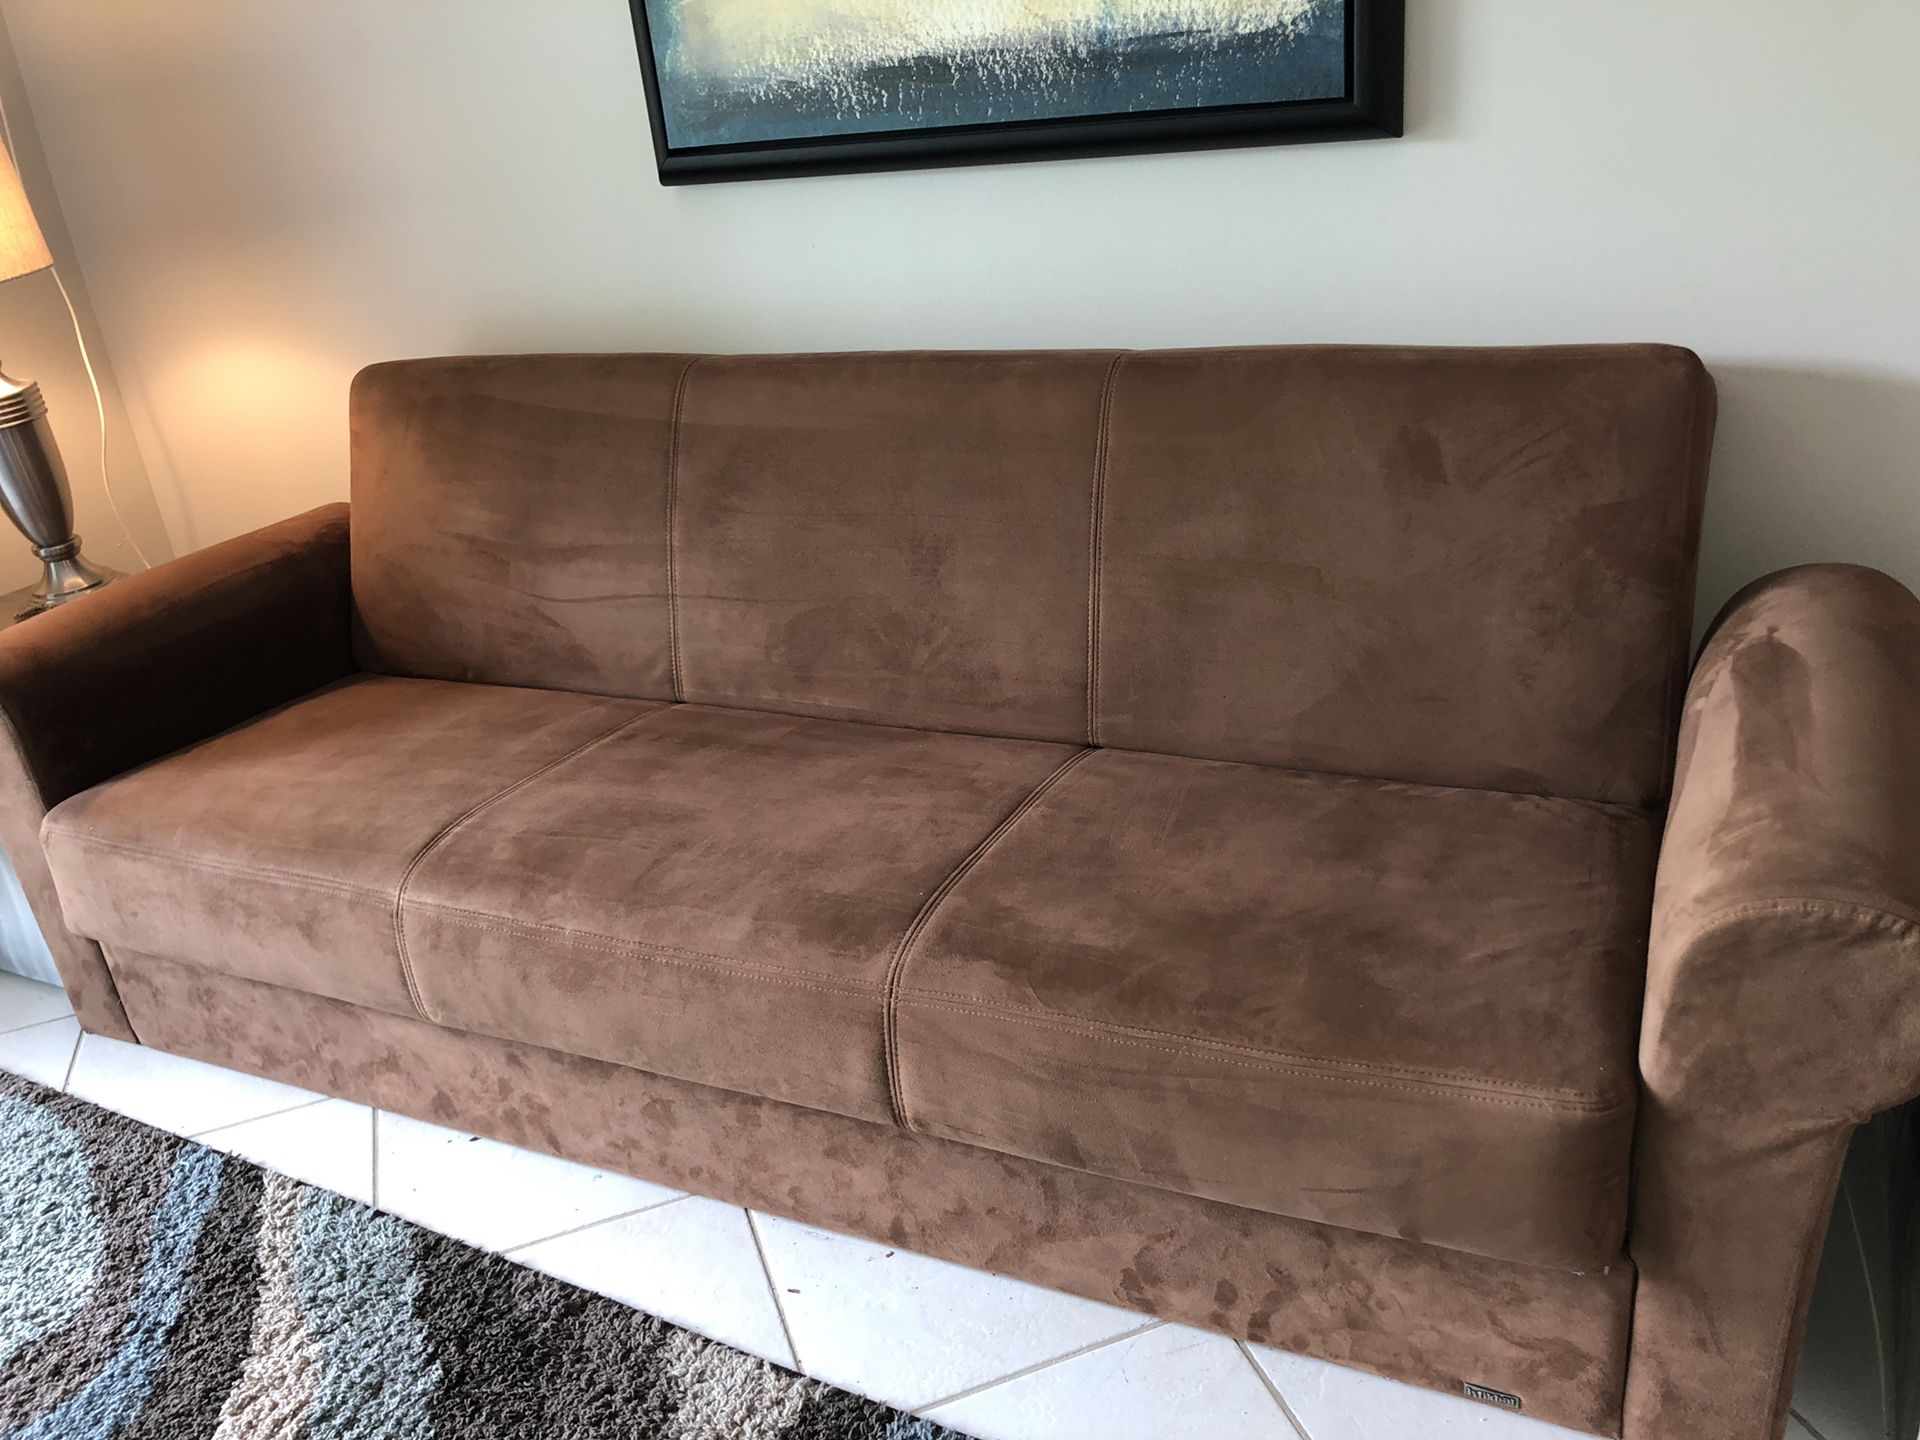 Soft brown fold out couch